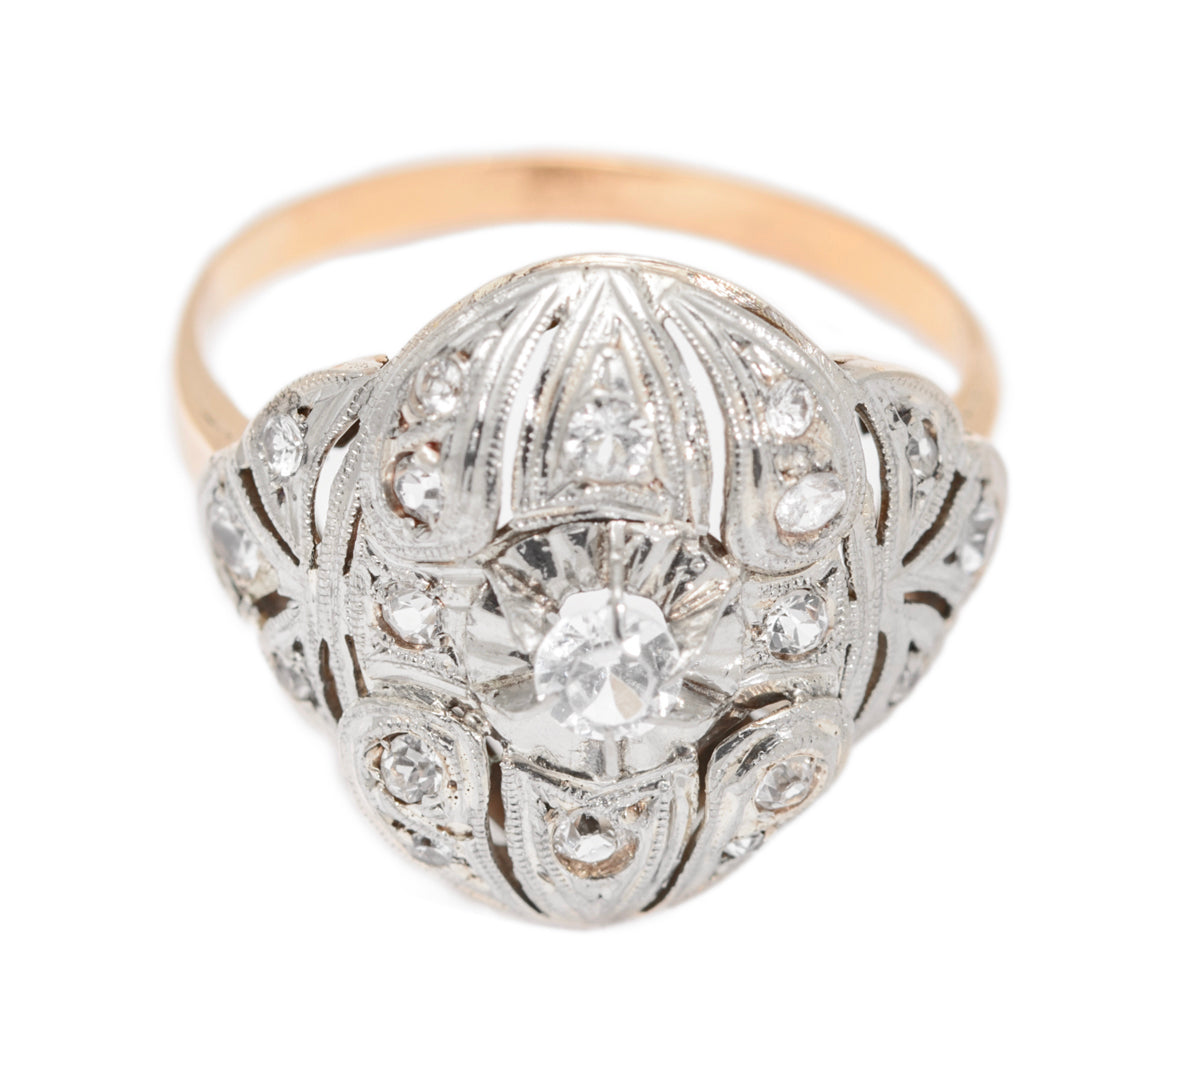 Art Deco 18ct Gold & Platinum French Cocktail Ring c.1920 Rock Crystal Gems (A1602)